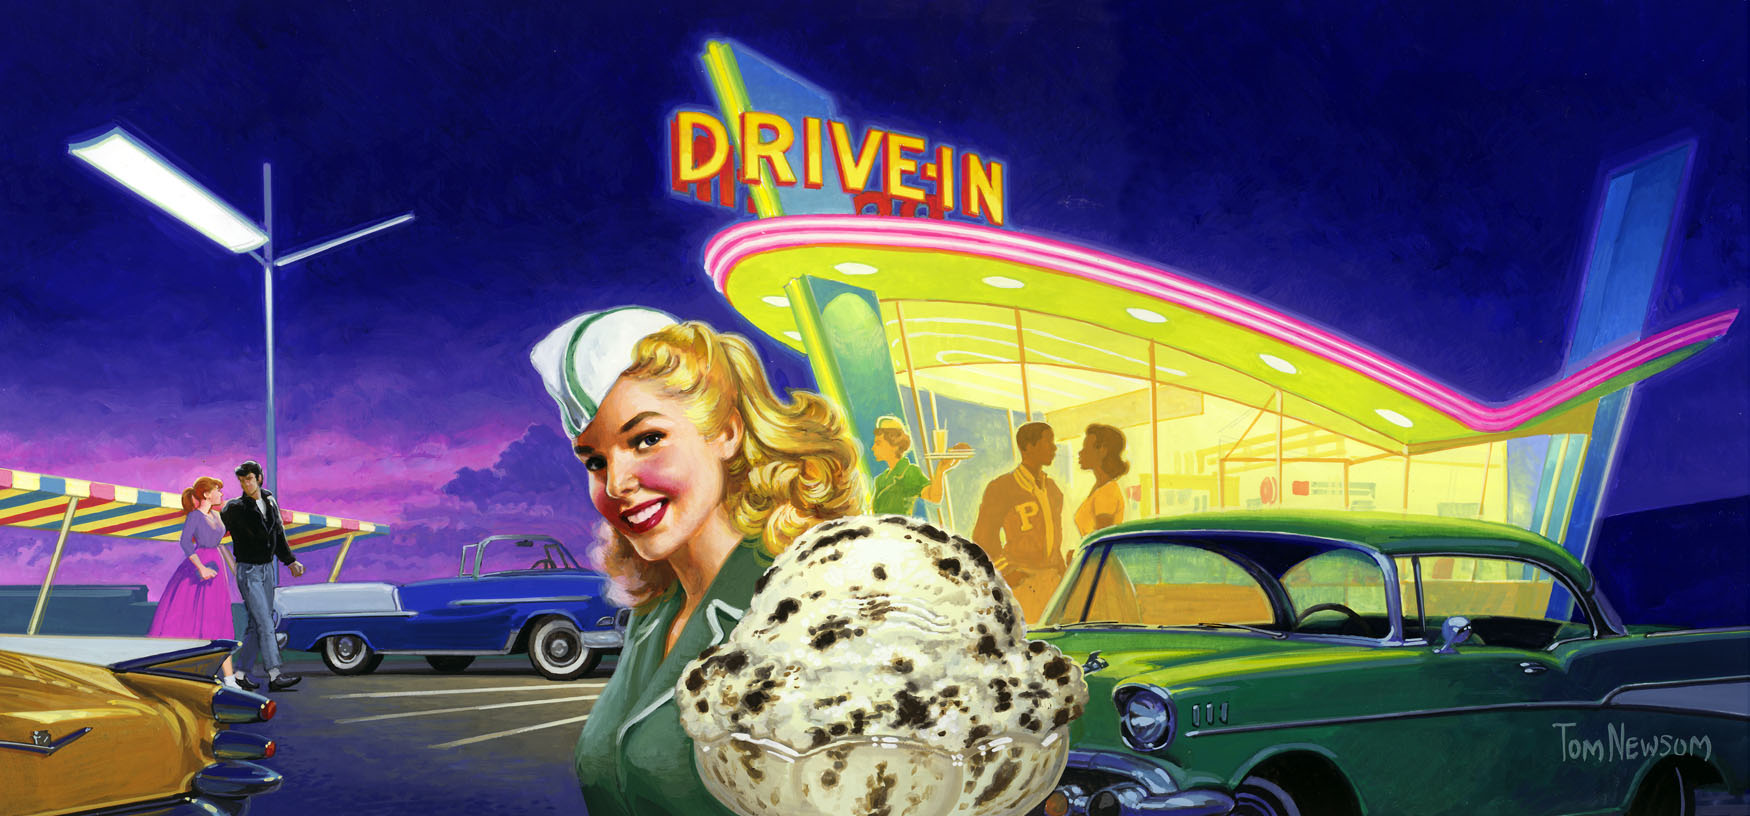 A beautiful and nostalgic drive-in is the background for this ice cream ad.